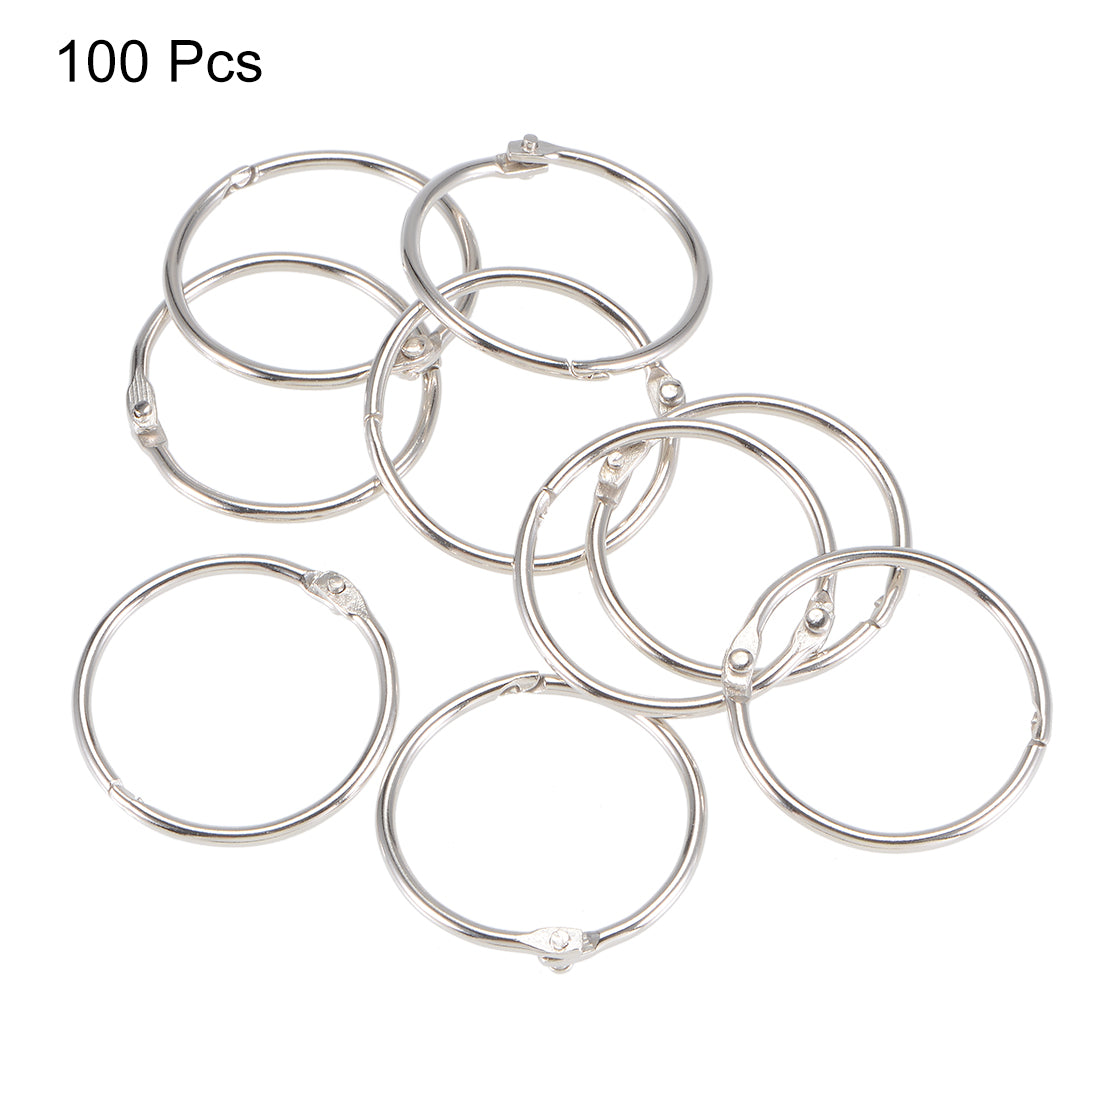 Uxcell Uxcell Binder Rings 20mm Open Jump Connector for Lanyard Zipper Handbag, Nickel Plated Iron, Pack of 100